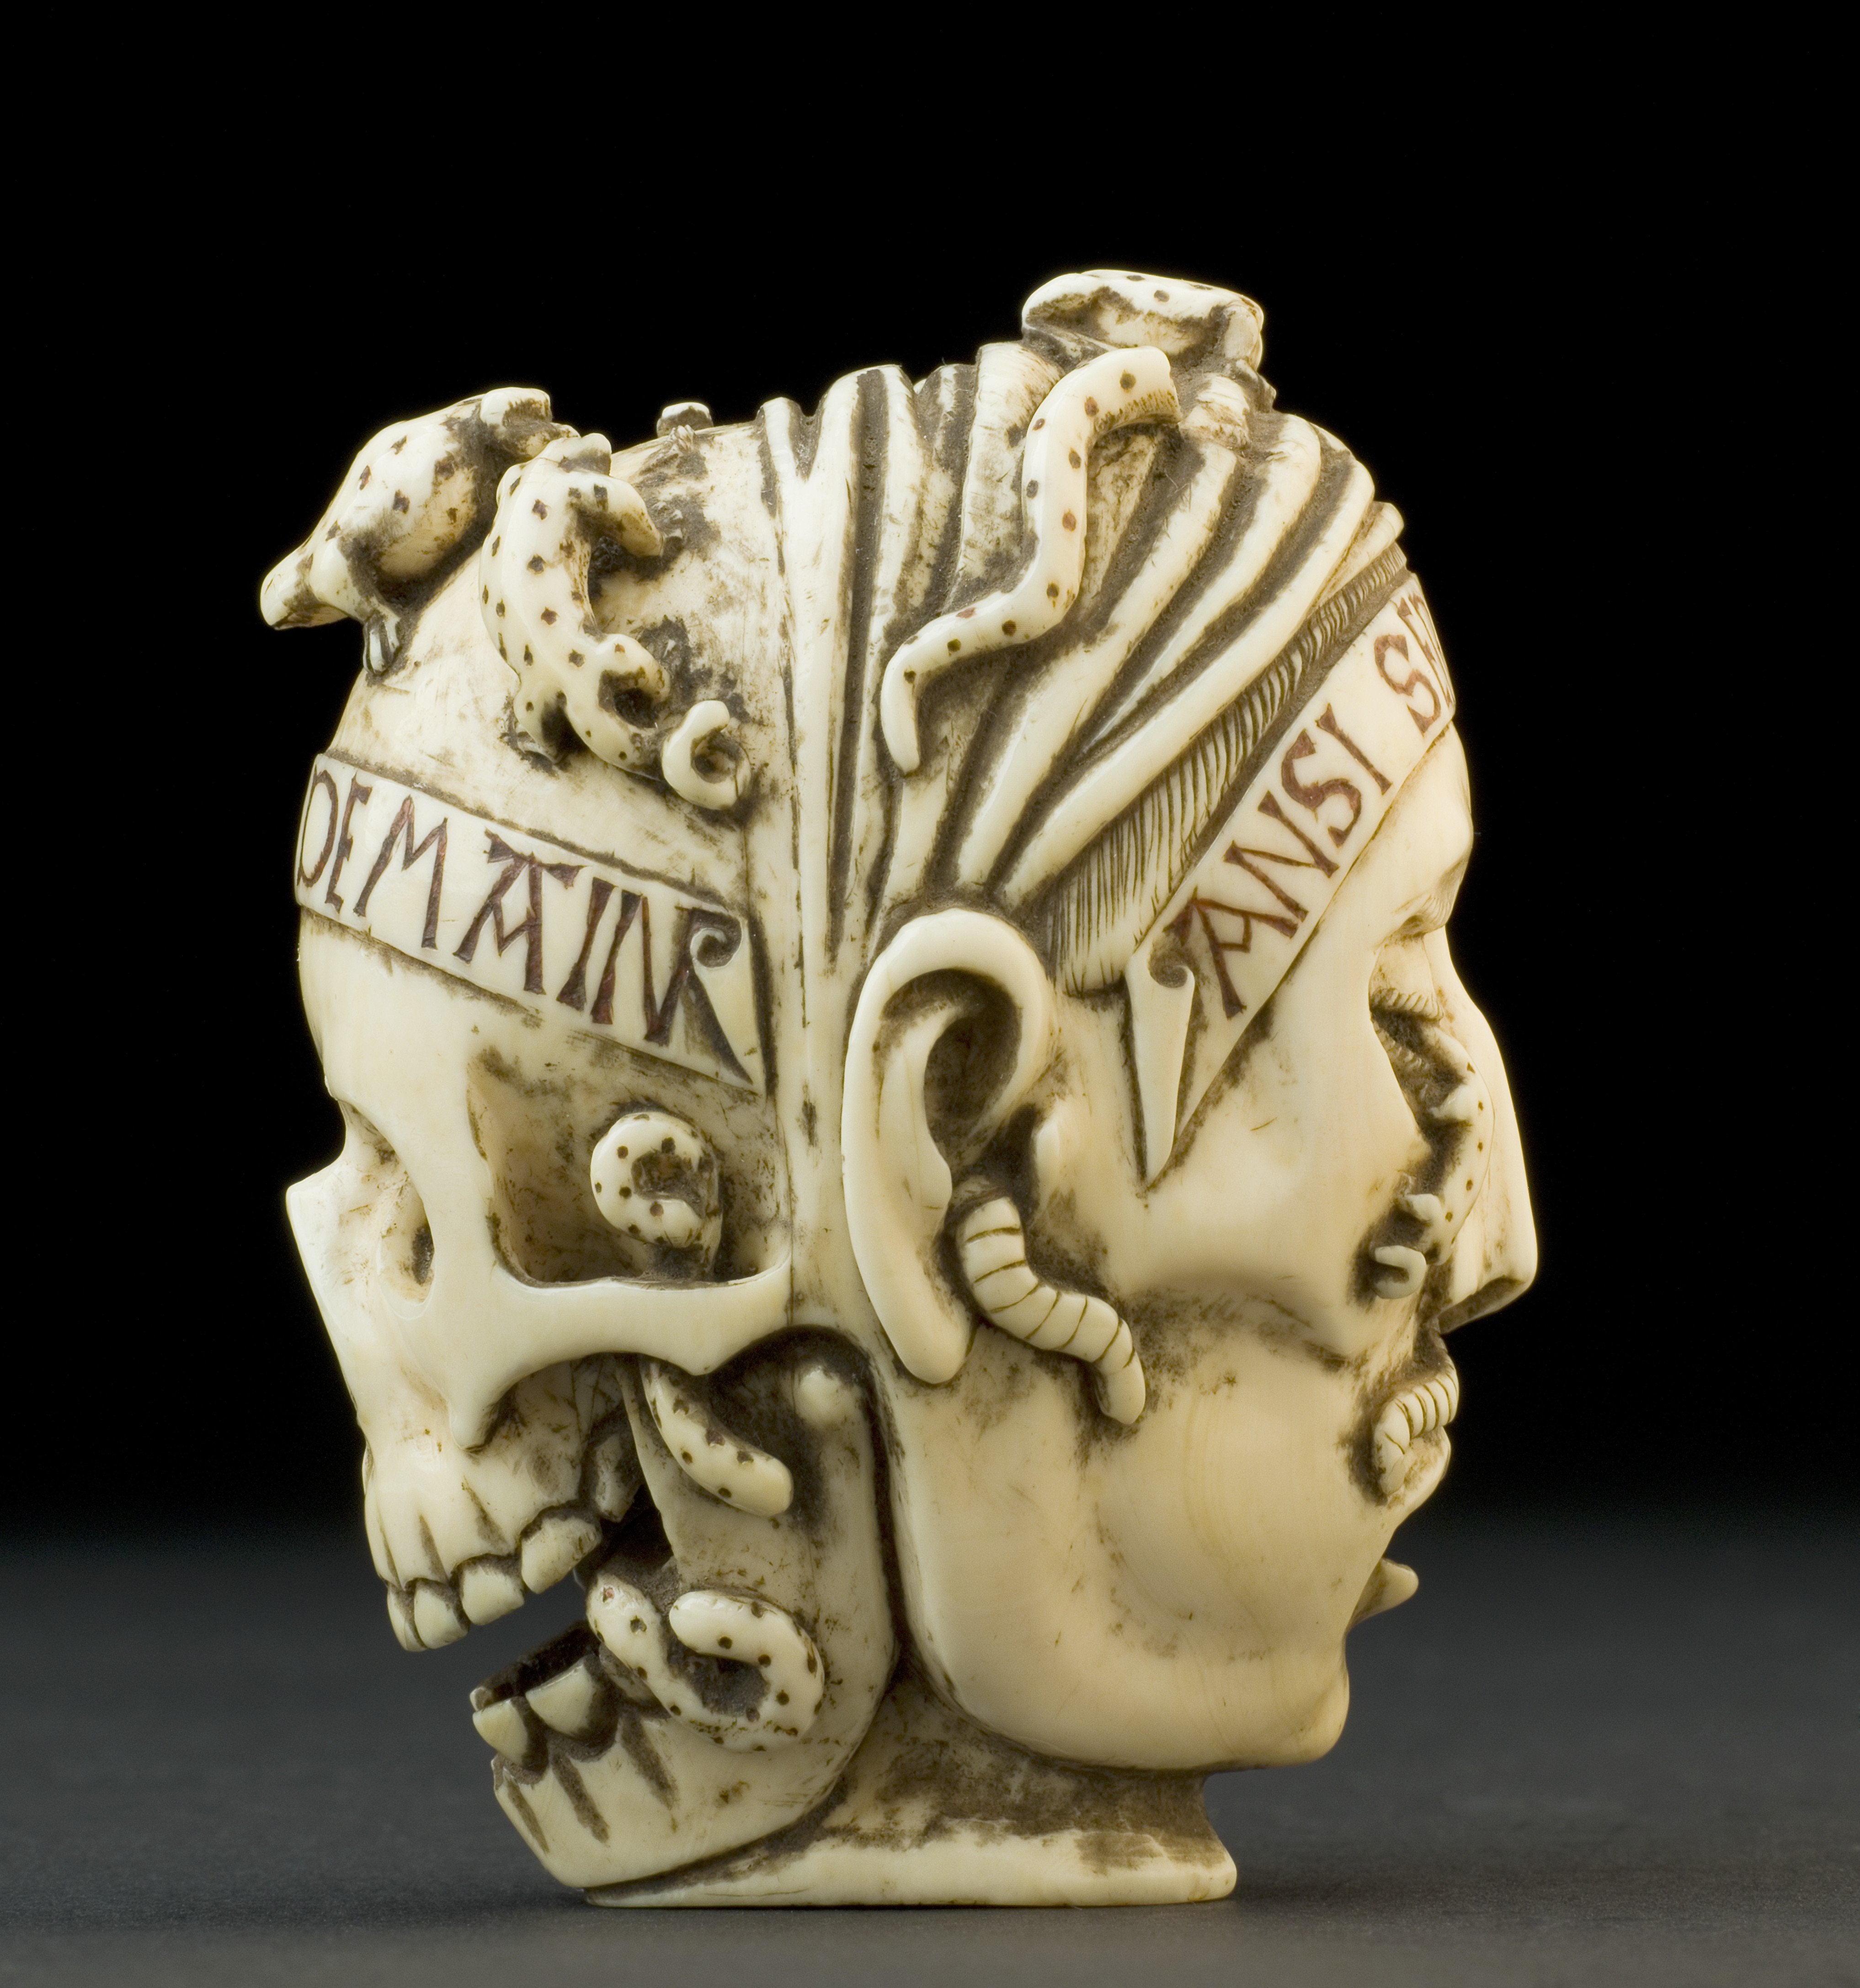 AINSI SERONS NOUS WI OU DEMAIN Ivory_model_of_a_skull_and_a_human_head,_France_Wellcome